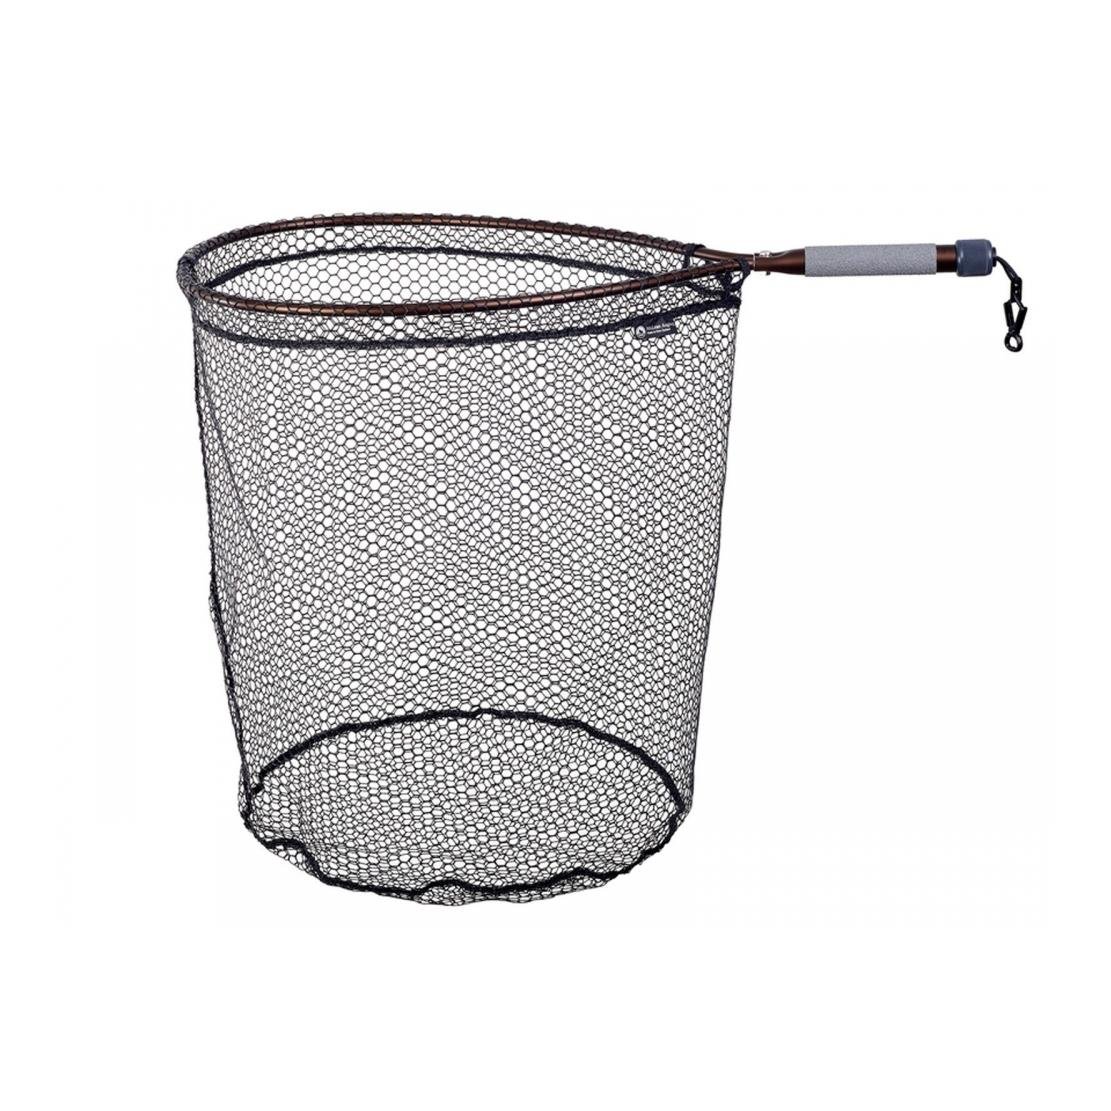 Image of McLean Angling Short Handle Rubber WeighNet L - Watfeumer inkl. Waage bei fischen.ch